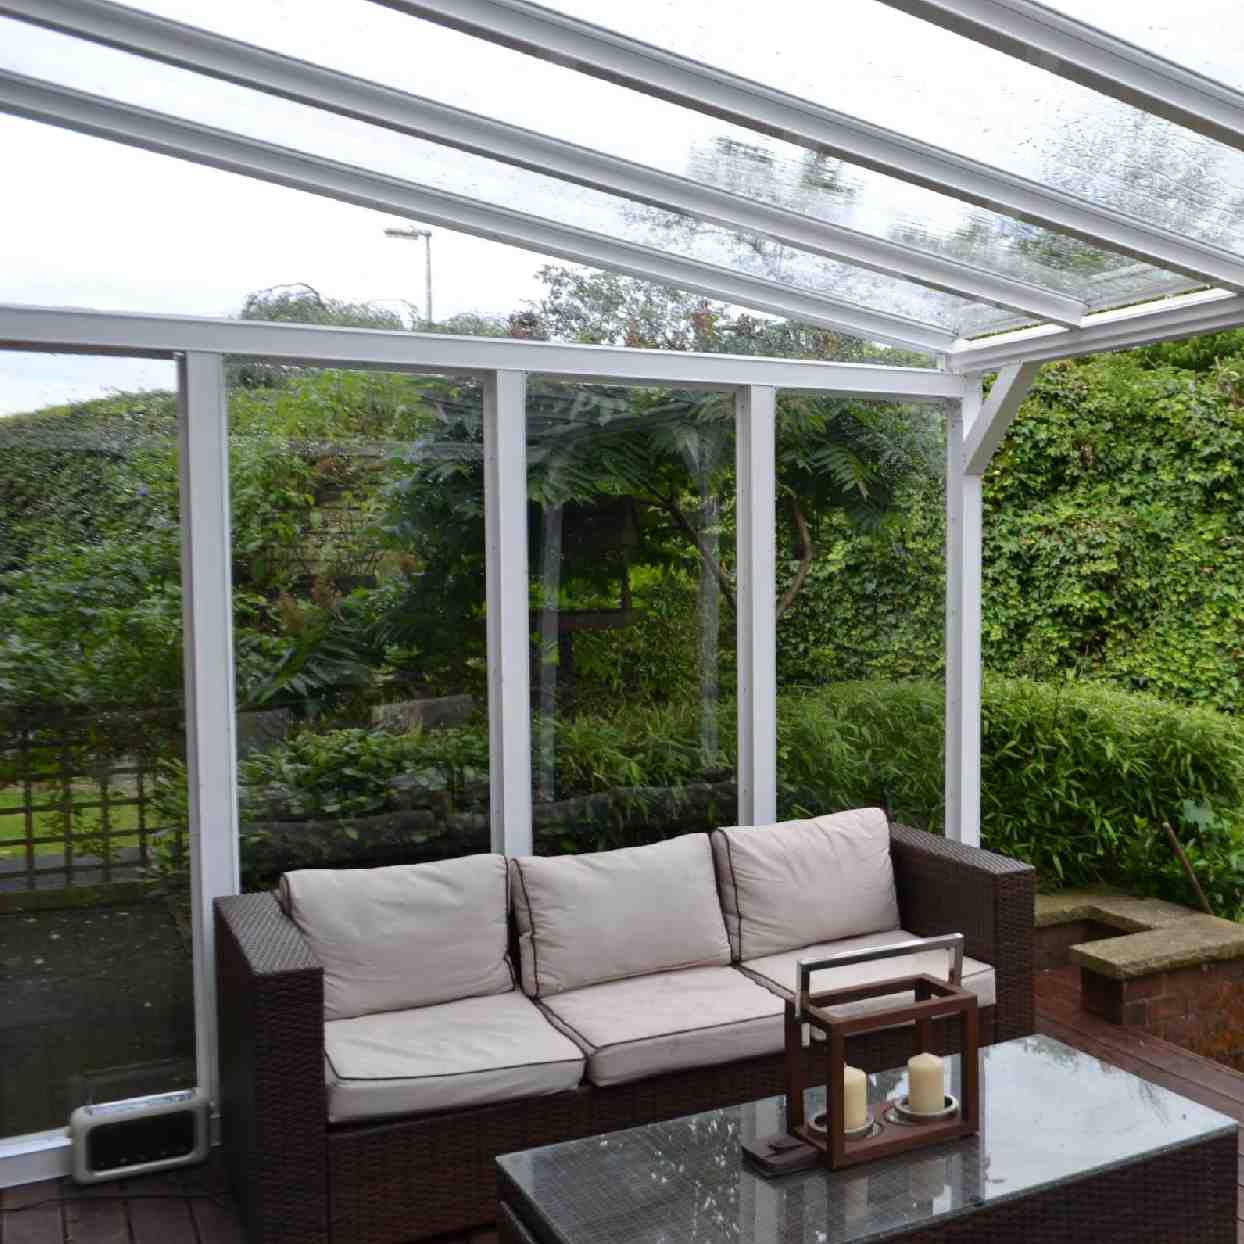 Buy Omega Verandah White with 16mm Polycarbonate Glazing - 4.2m (W) x 3.5m (P), (3) Supporting Posts online today